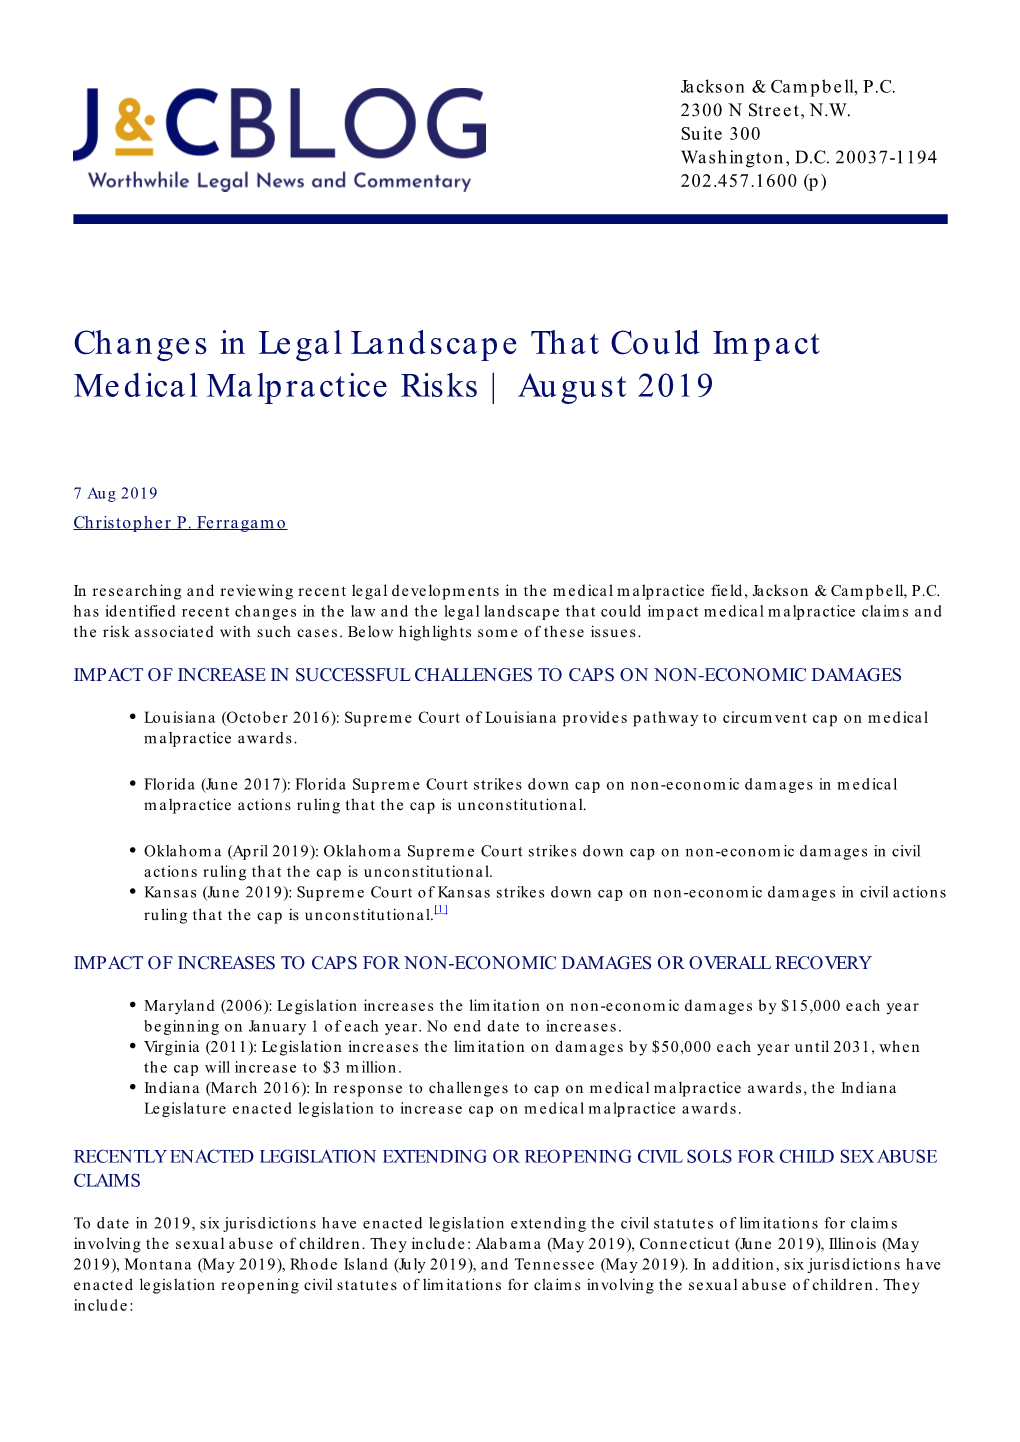 Changes in Legal Landscape That Could Impact Medical Malpractice Risks | August 2019